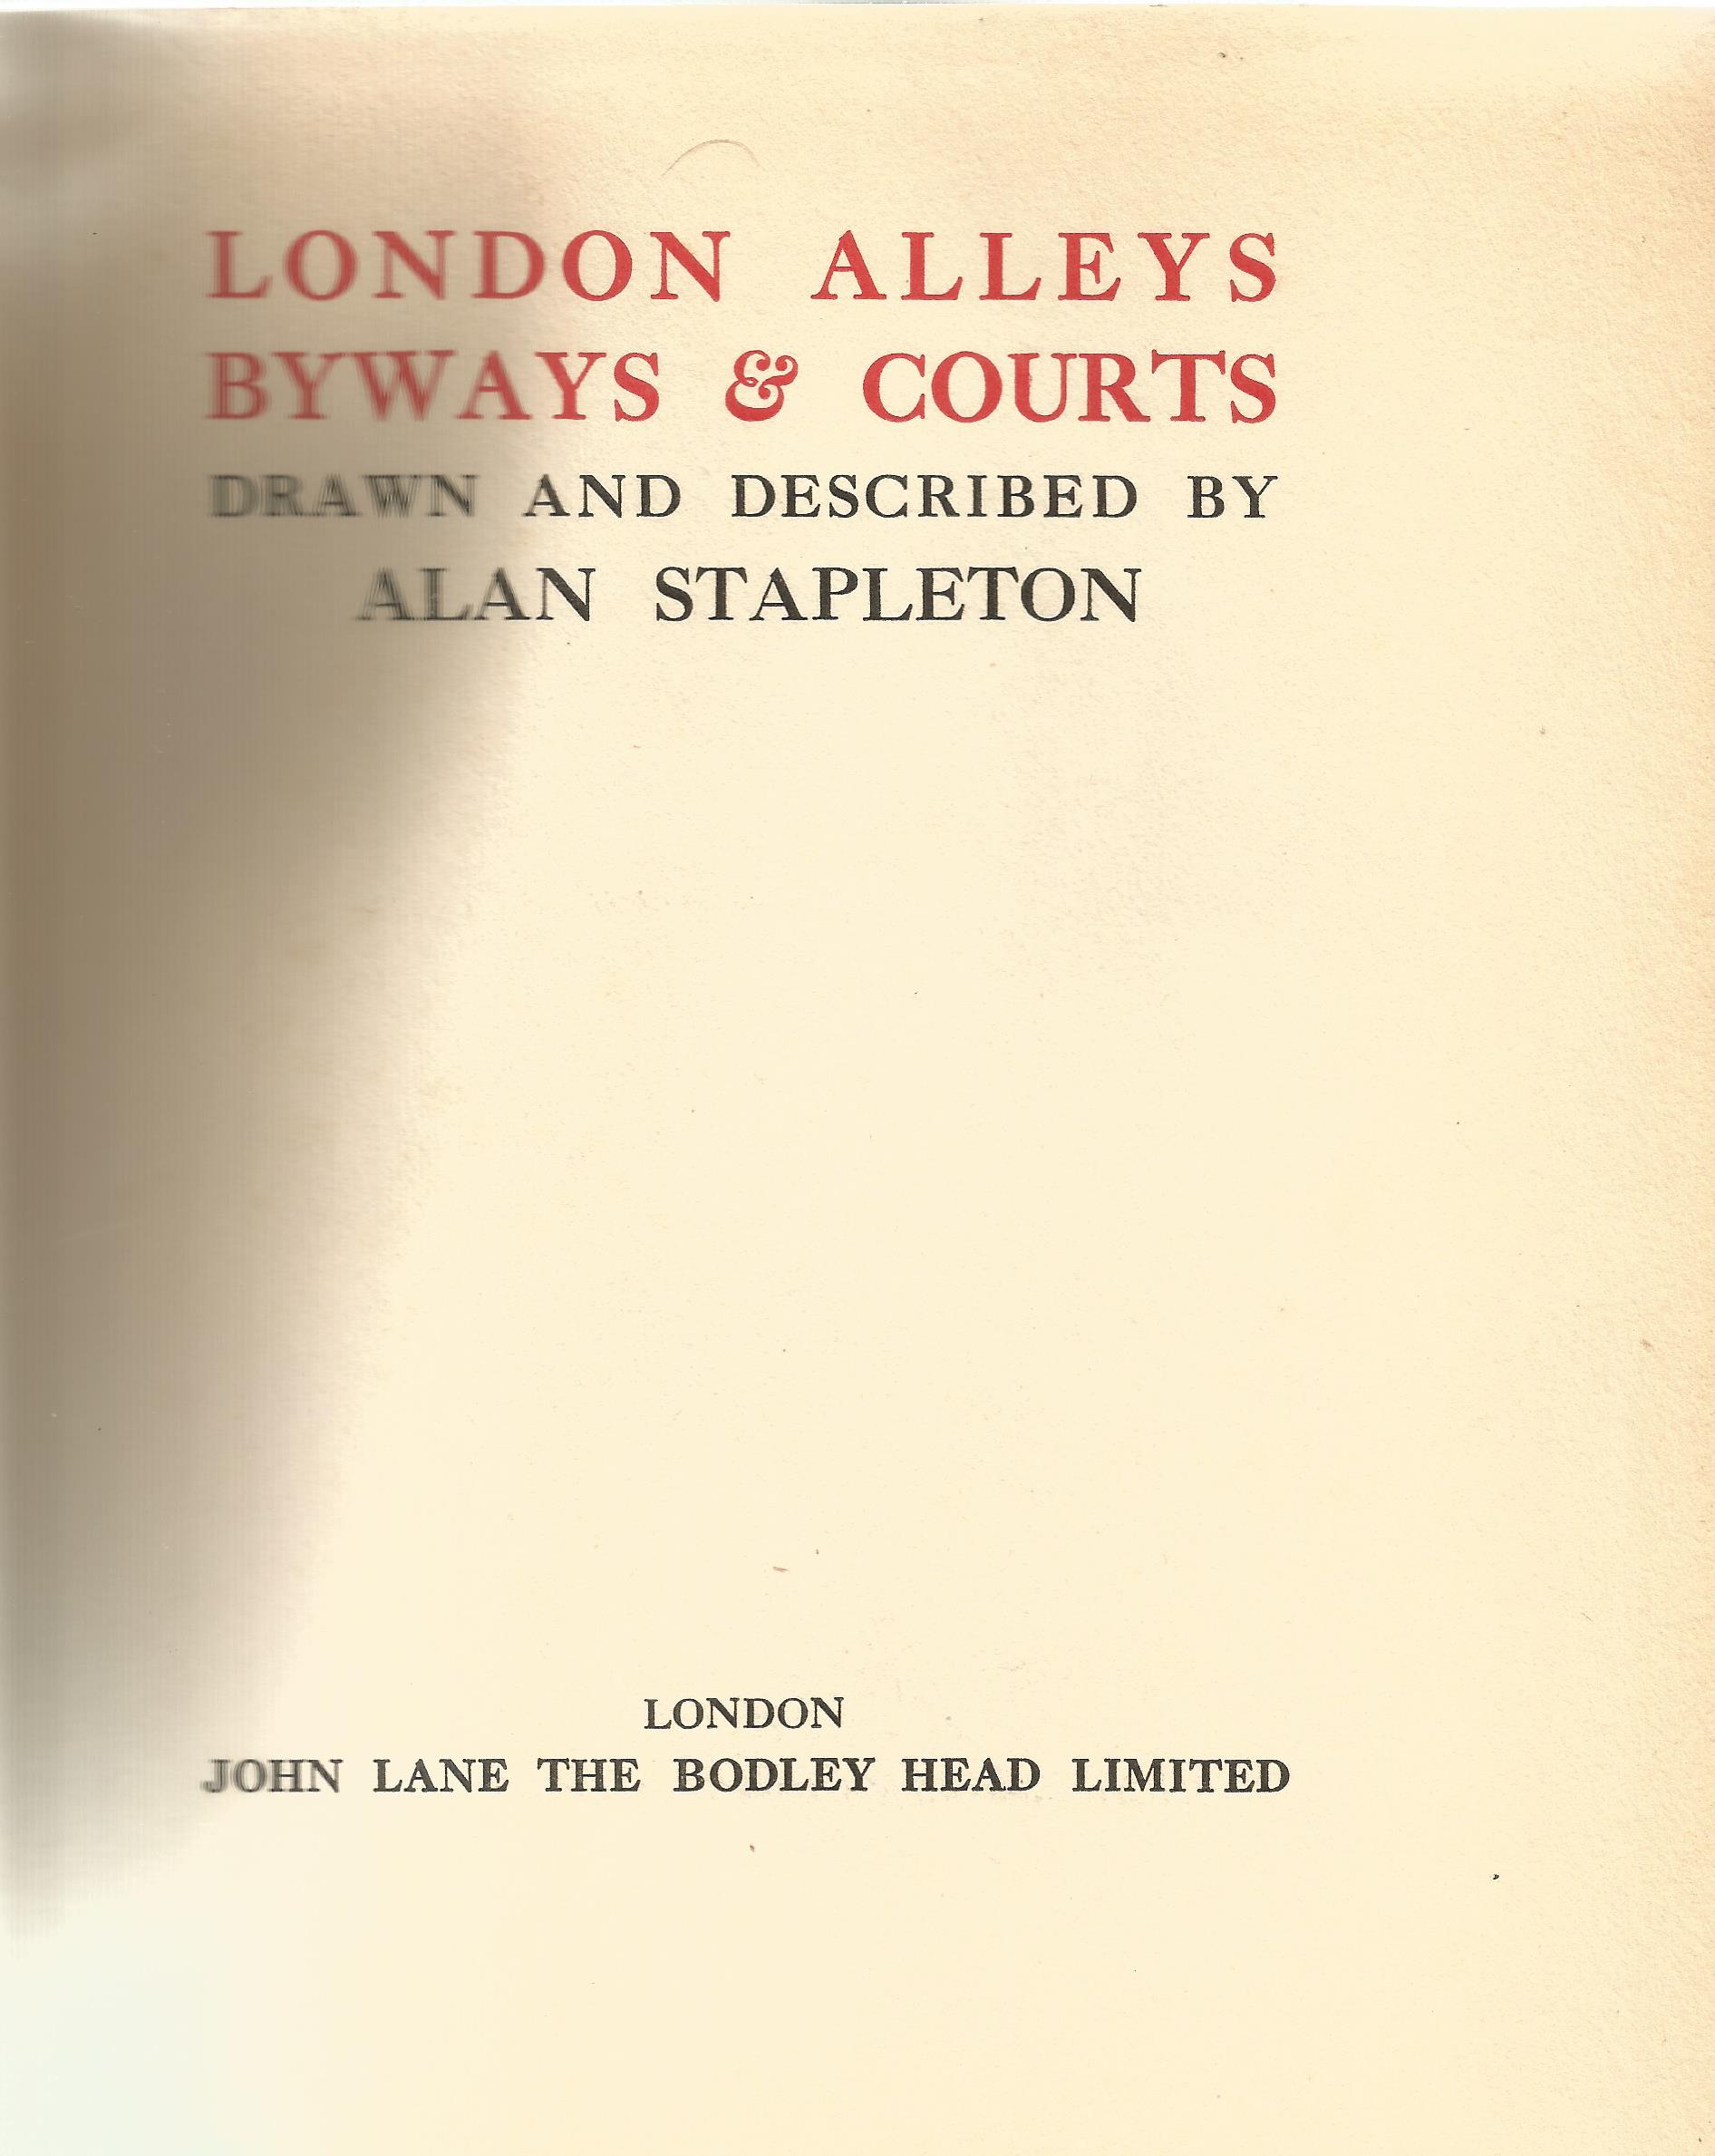 London Alleys, Byways and Courts Drawn and Described by Alan Stapleton First Edition 1924 Hardback - Image 2 of 3